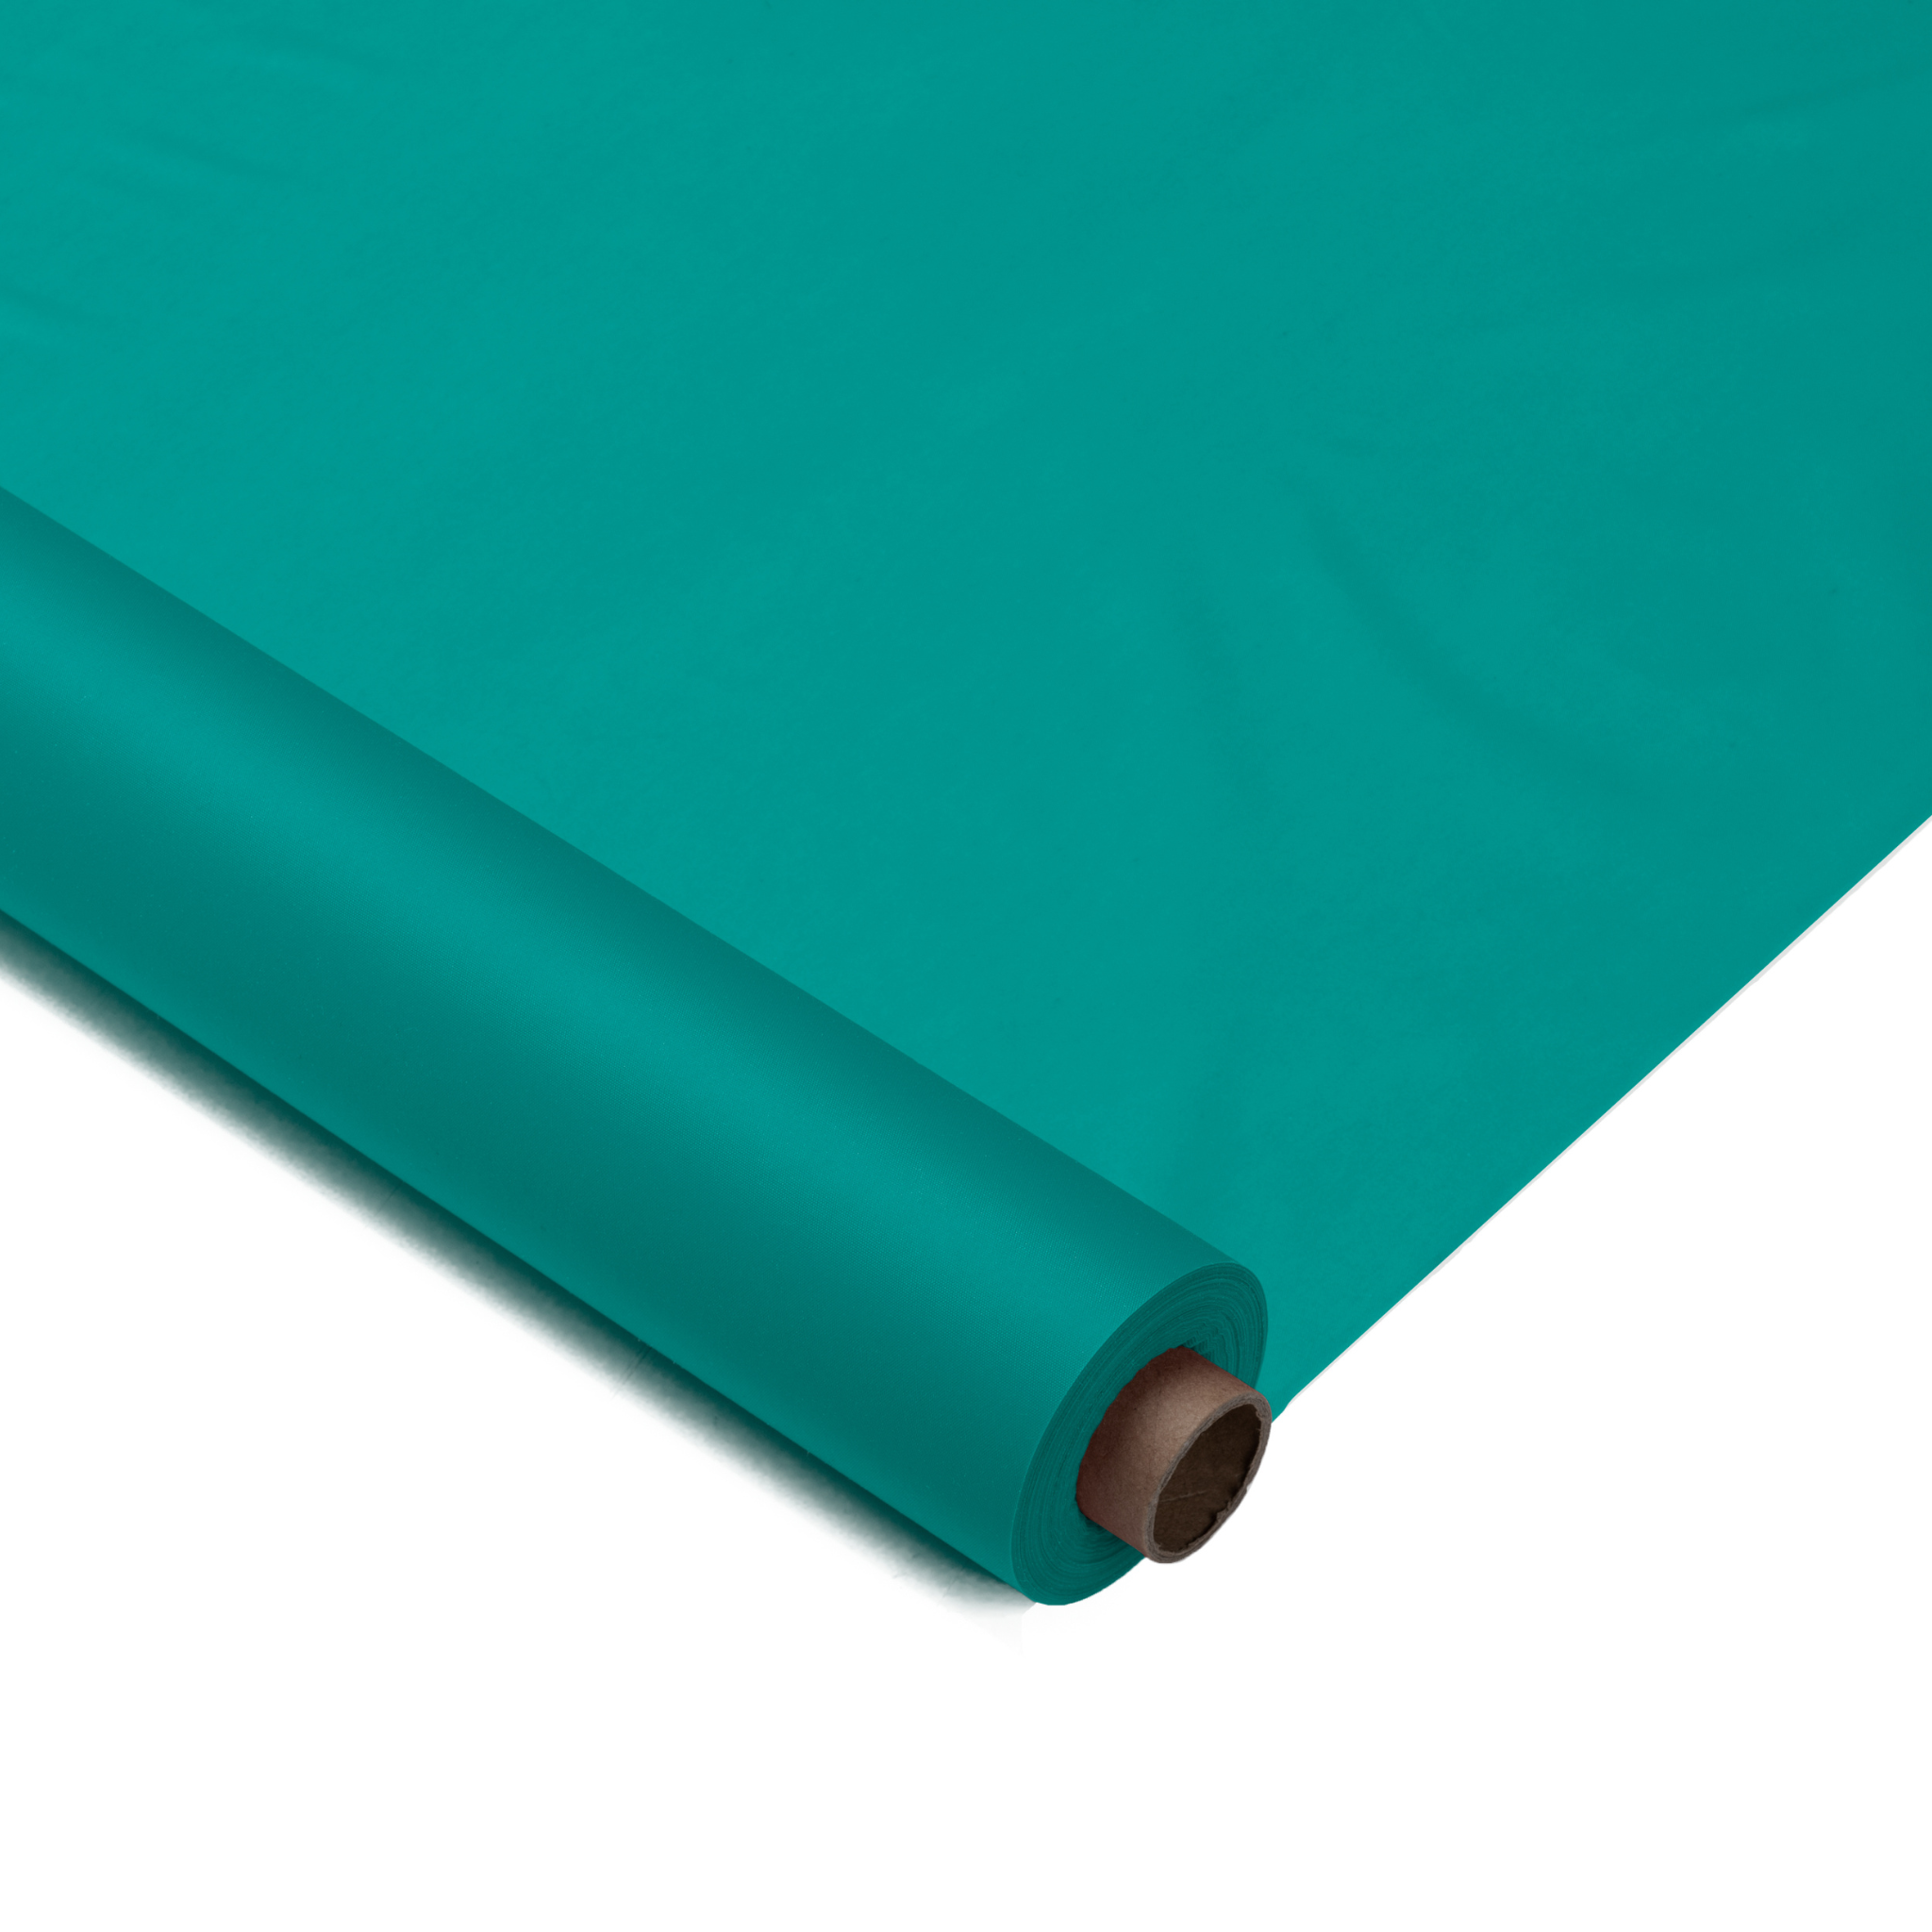 40 In. X 300 Ft. Premium Teal Plastic Table Roll | 4 Pack